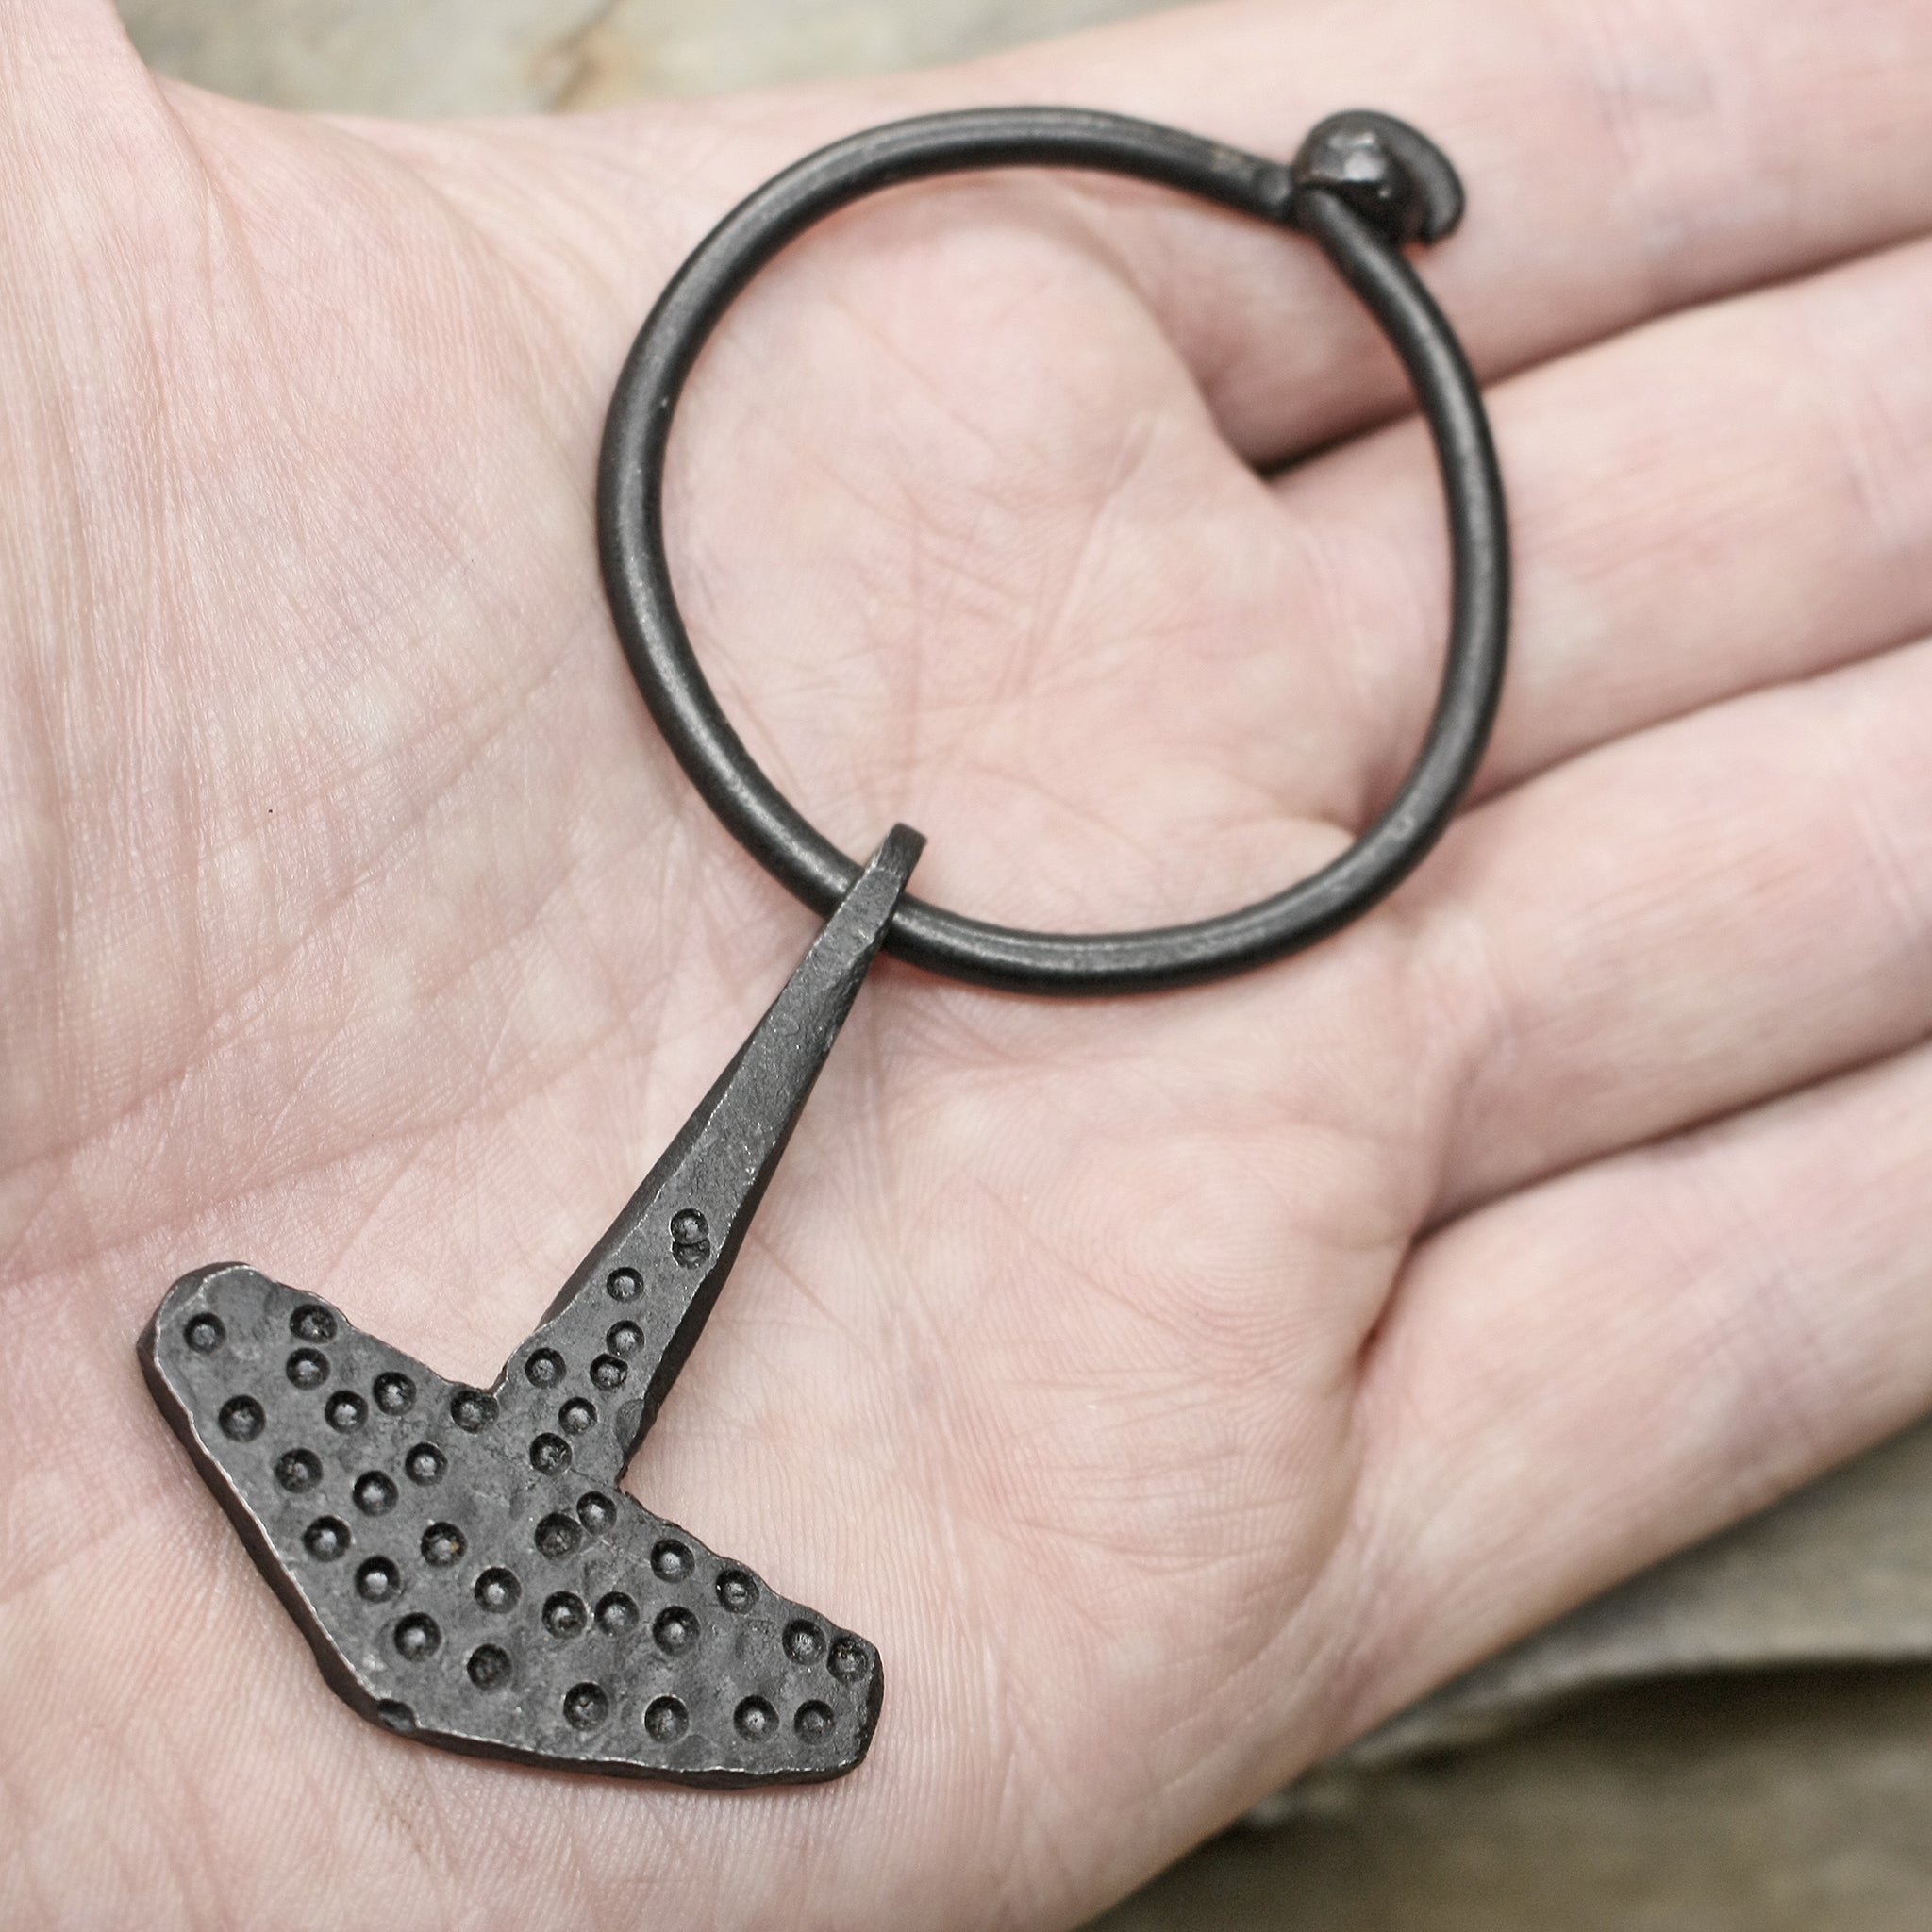 Embossed Iron Thors Hammer Replica Pendant on Ring on Hand